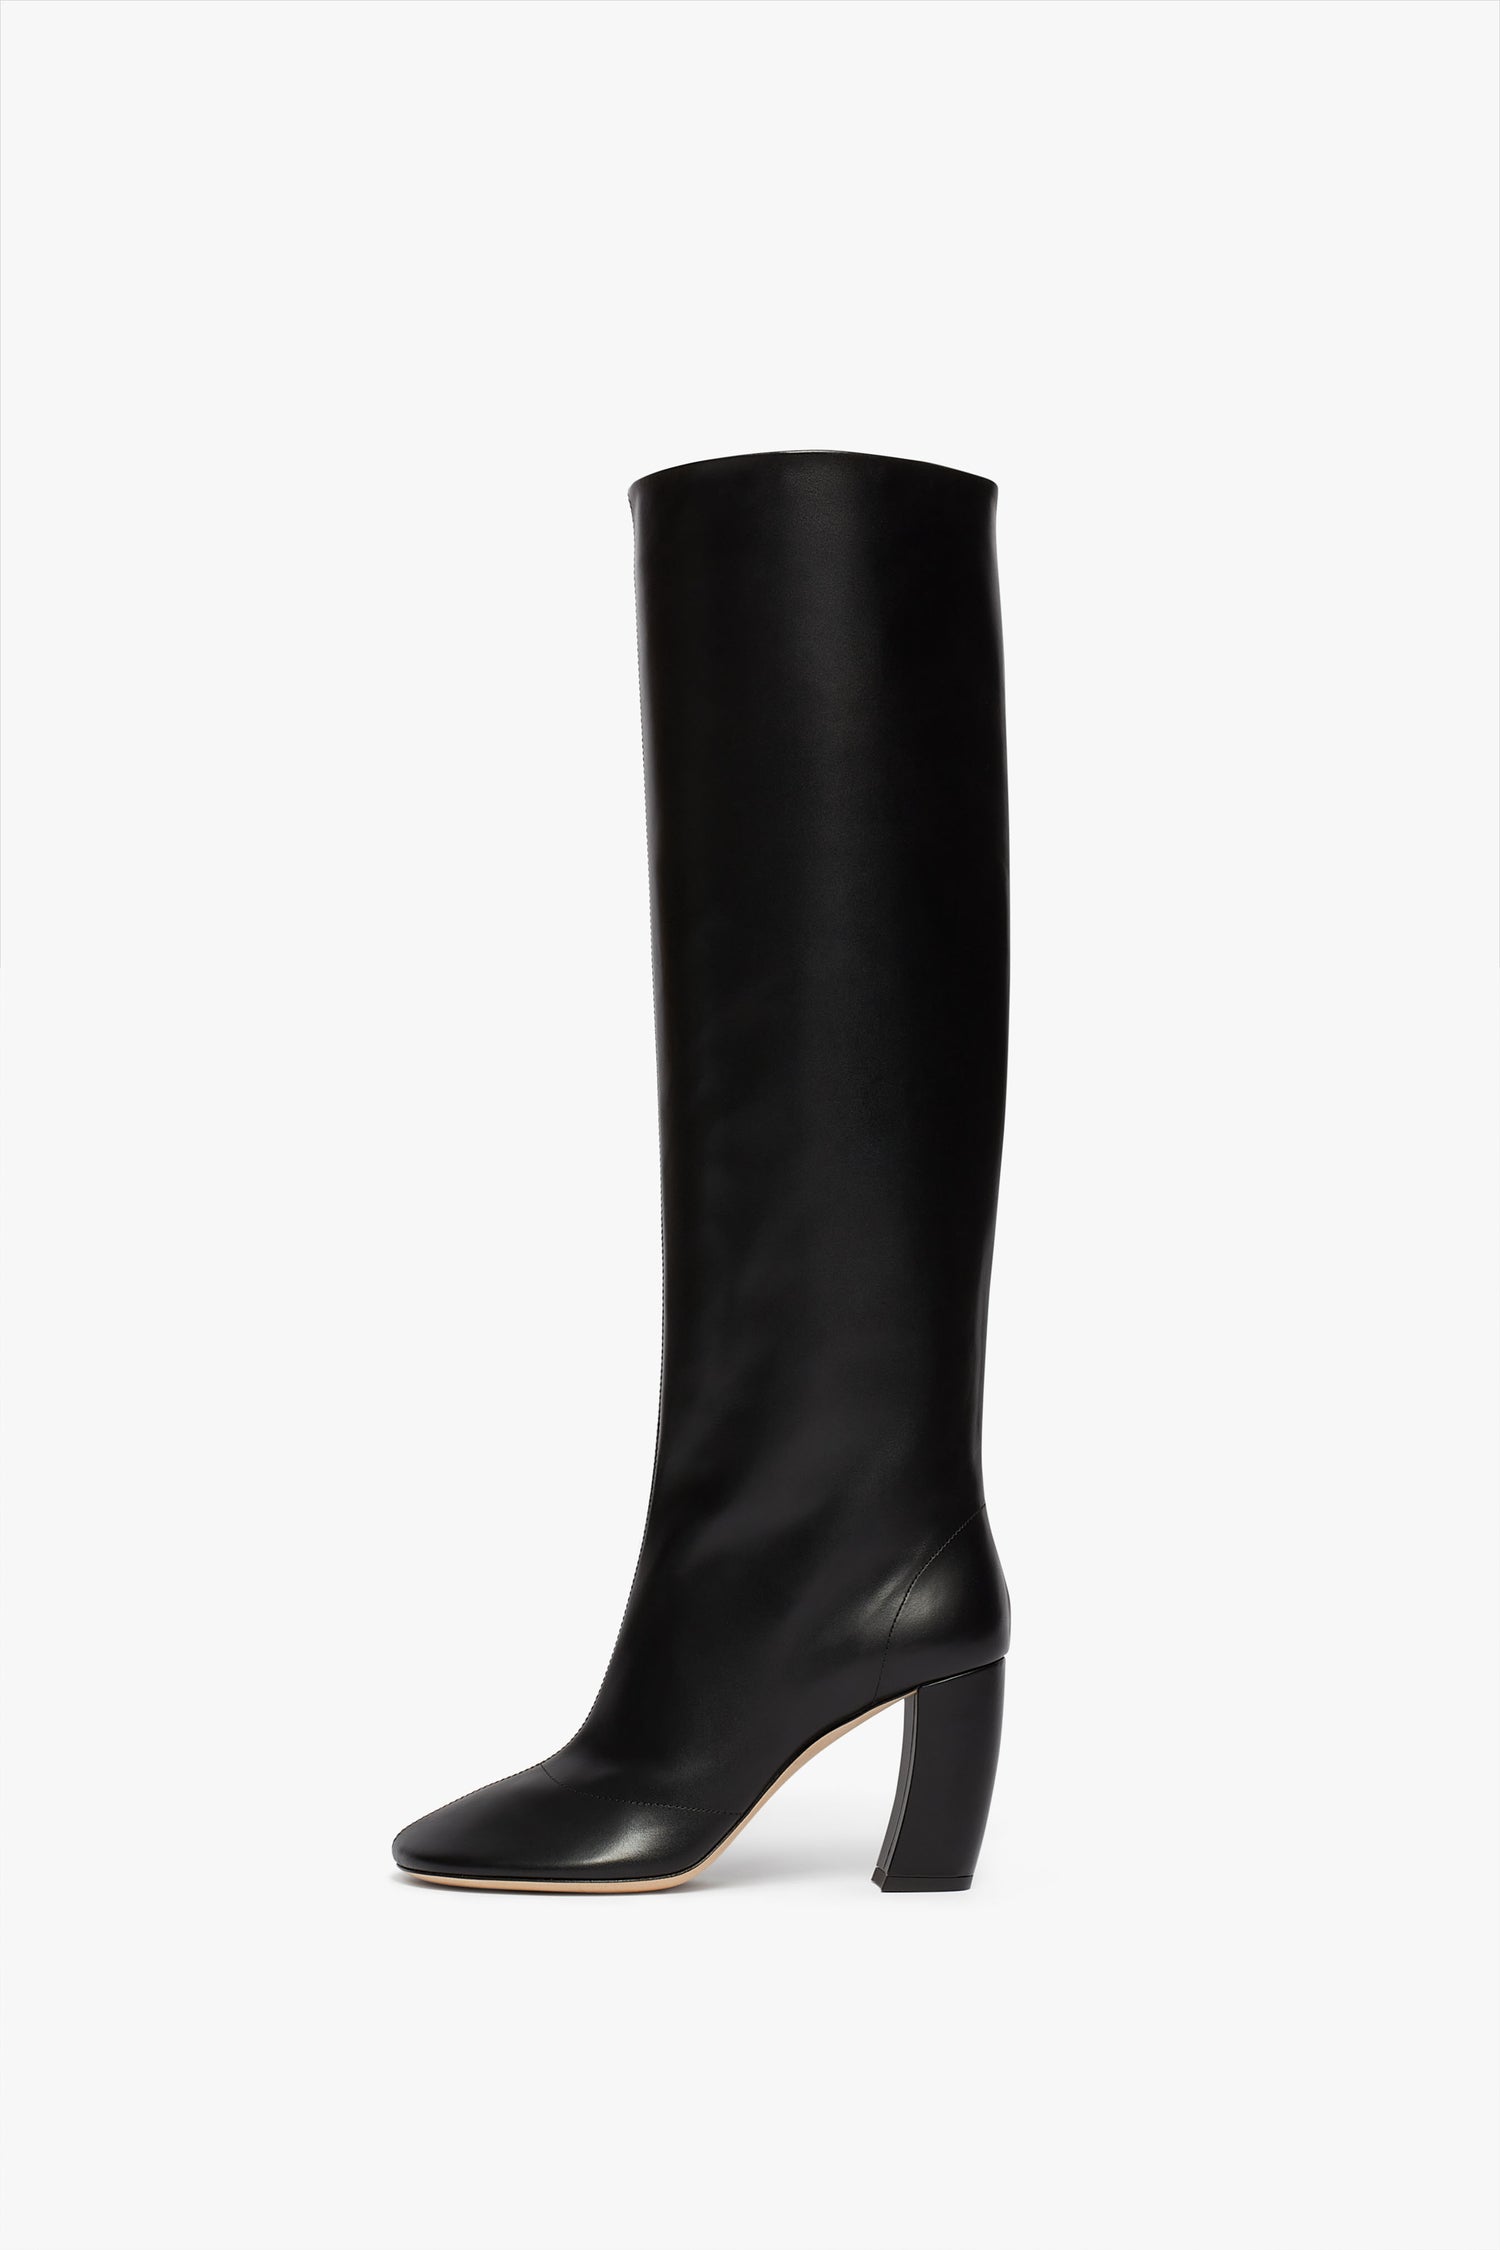 A black calf leather, knee-high tall boot with a rounded toe and a thick, angled 115mm heel on a white background. Product Name: Capri Rise Boot 115mm in Black Brand Name: Victoria Beckham